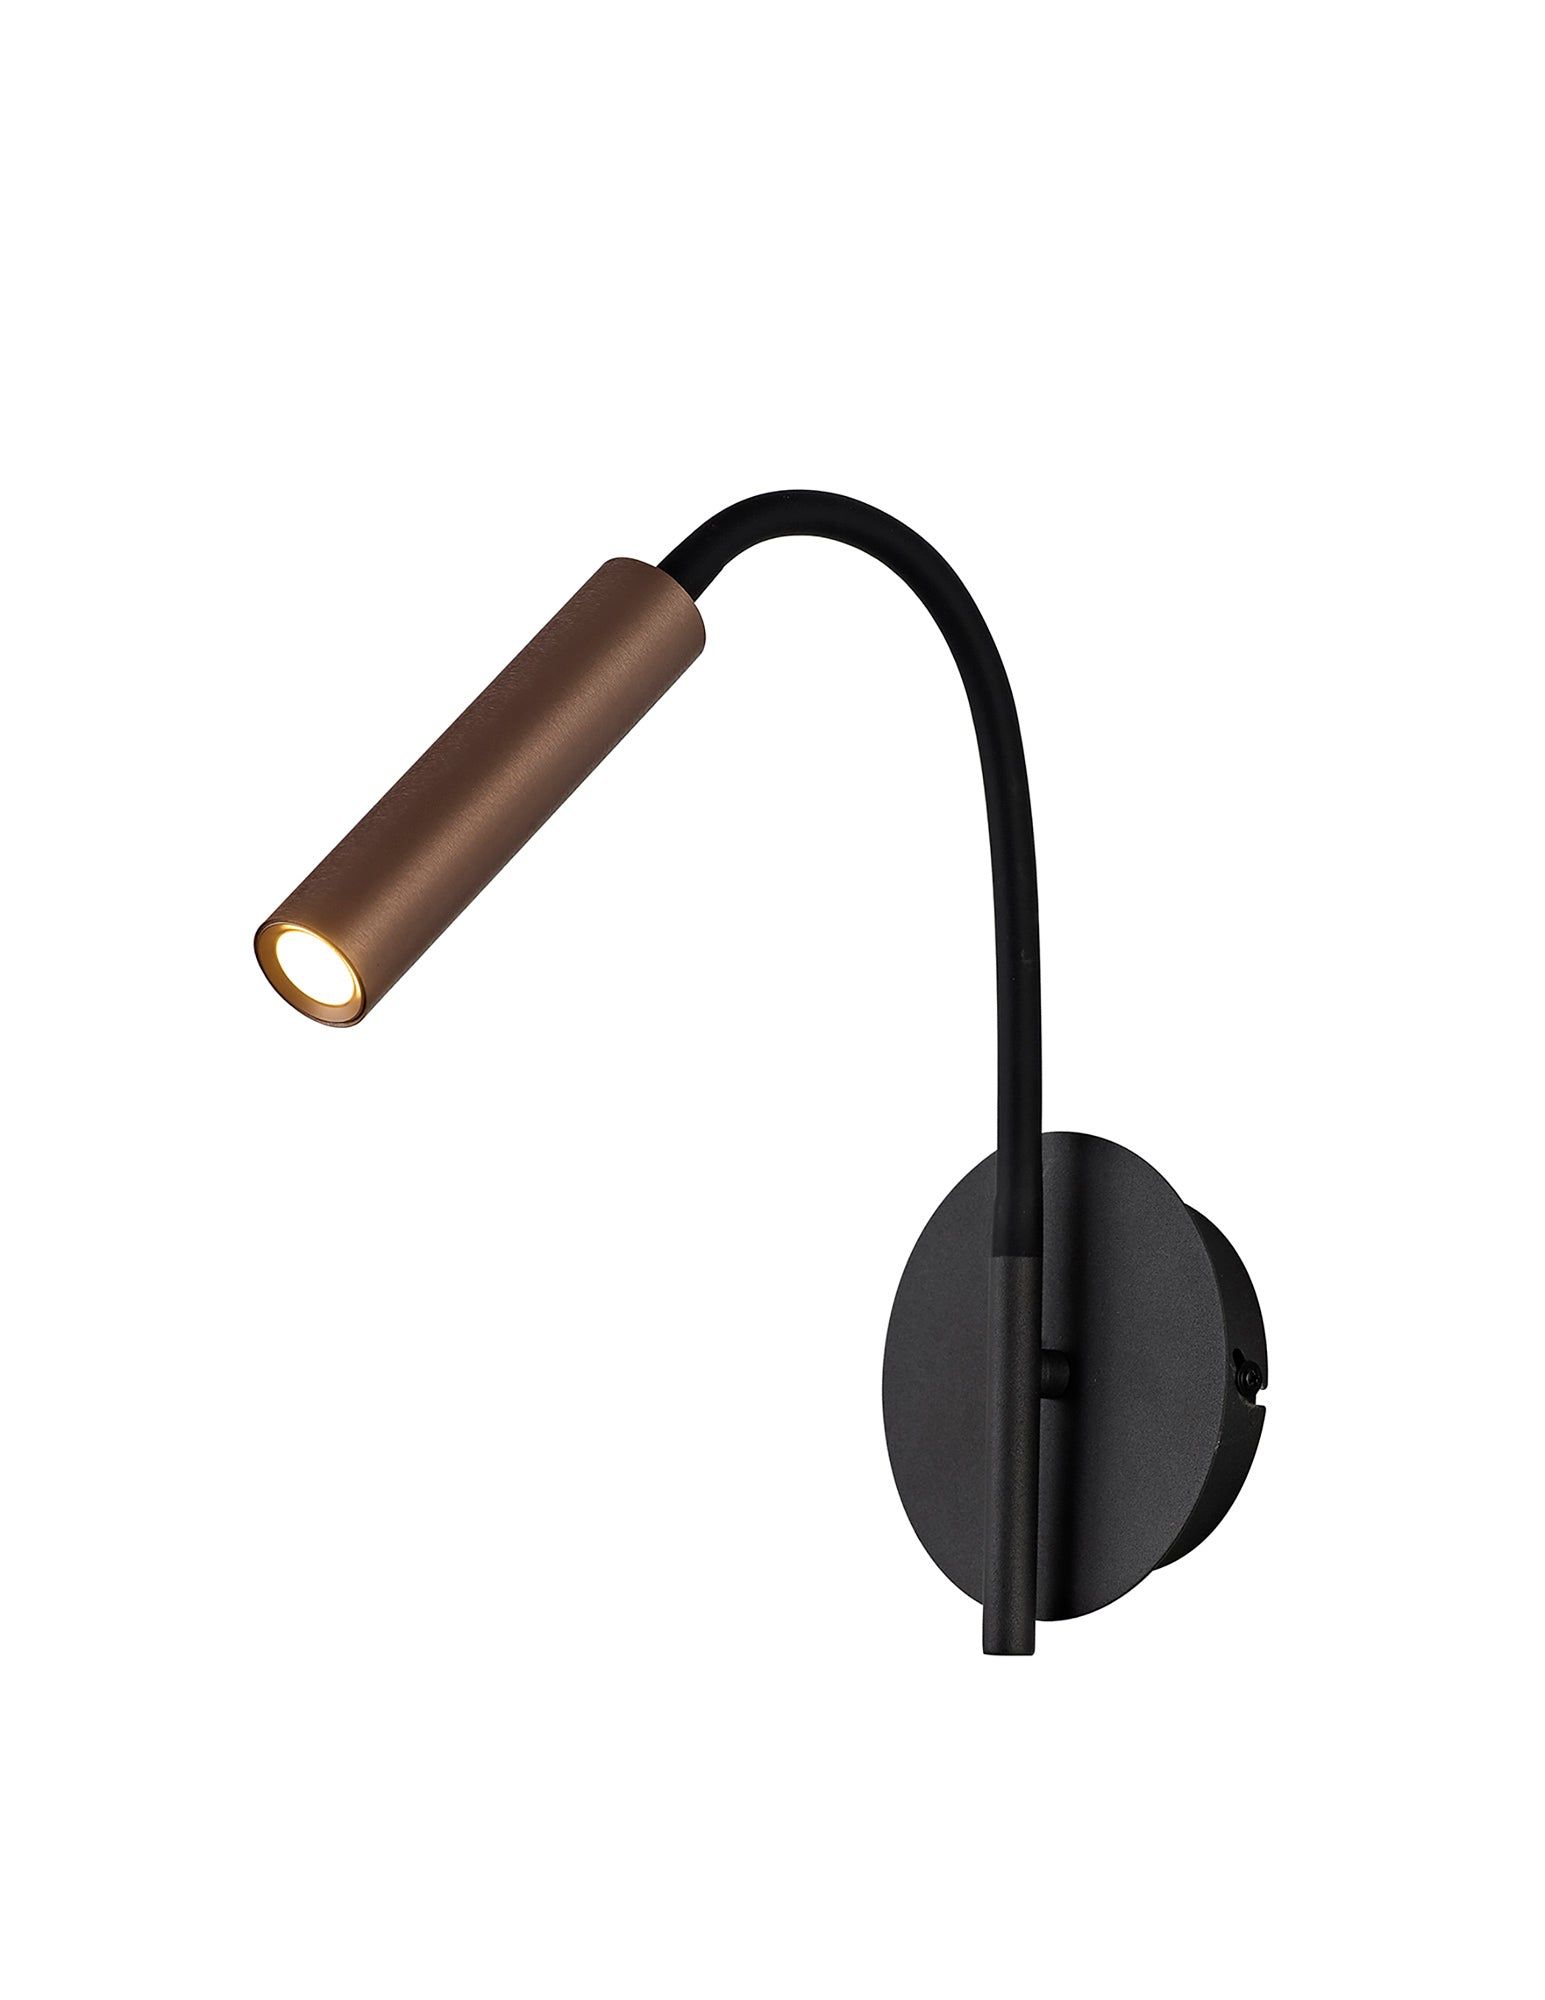 Aibeo Wall Lamp, 1 Light Adjustable Switched, 1 x 7W LED, 3000K, 436lm, Black & Satin Copper, 3yrs Warranty